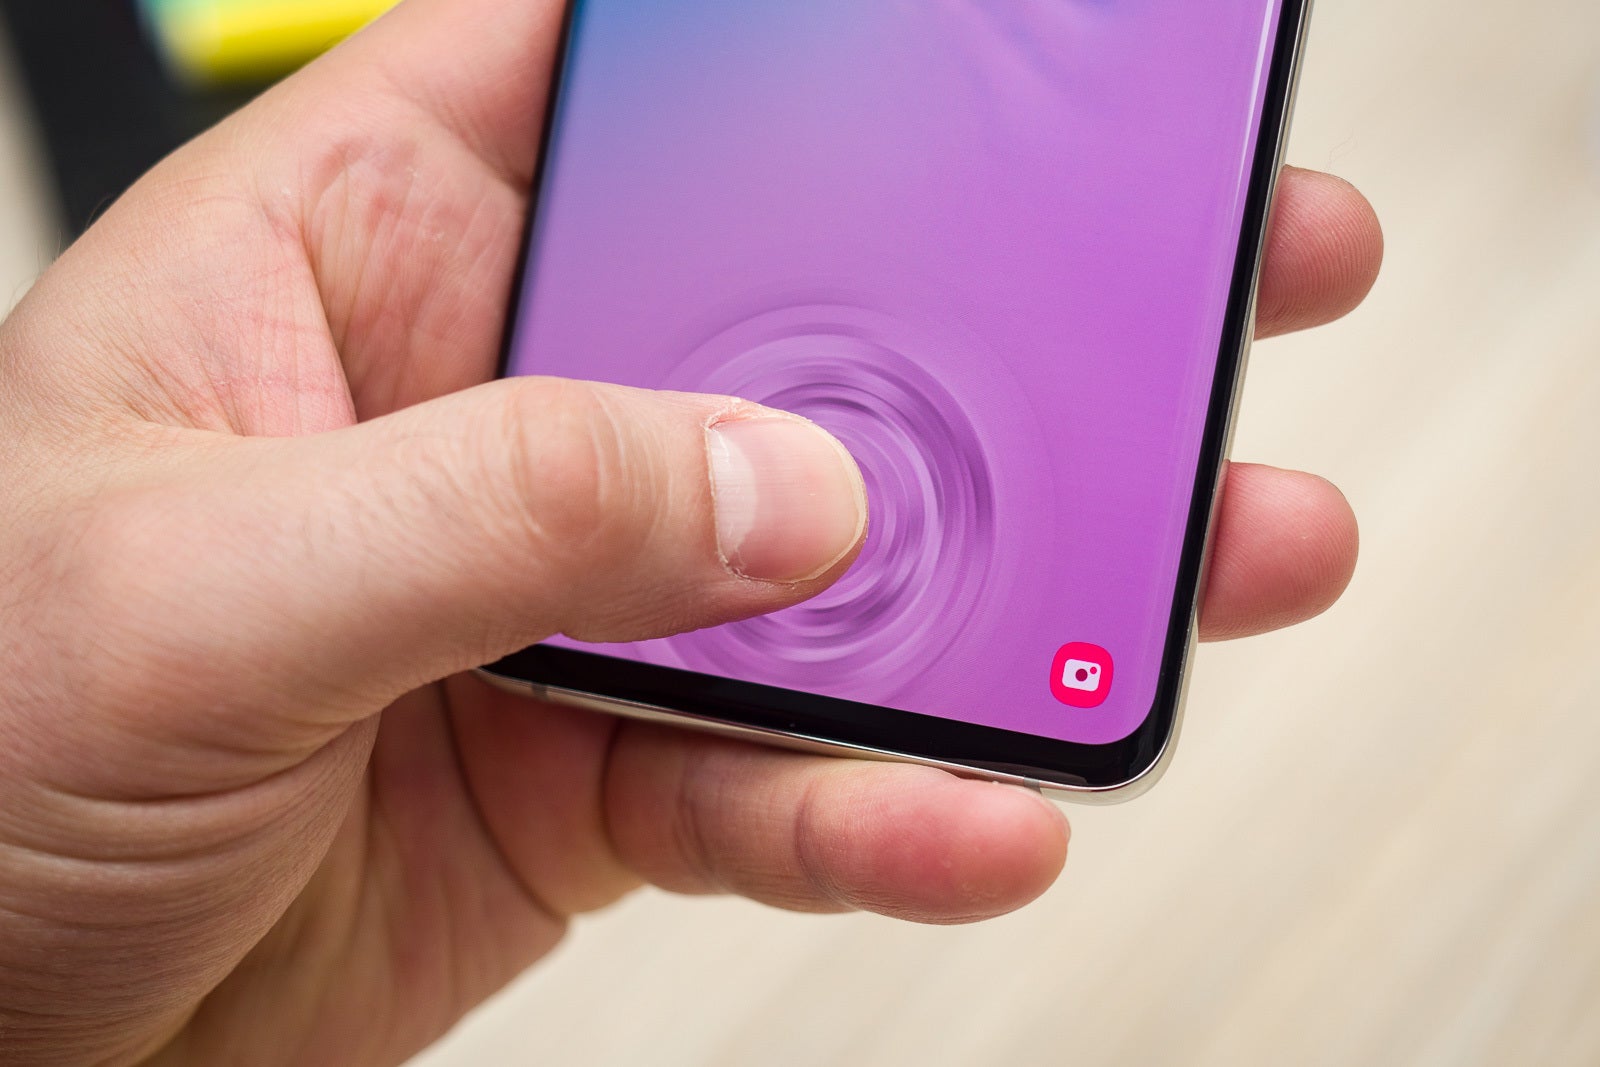 Samsung Galaxy S10 and S10+ review: 10 key takeaways